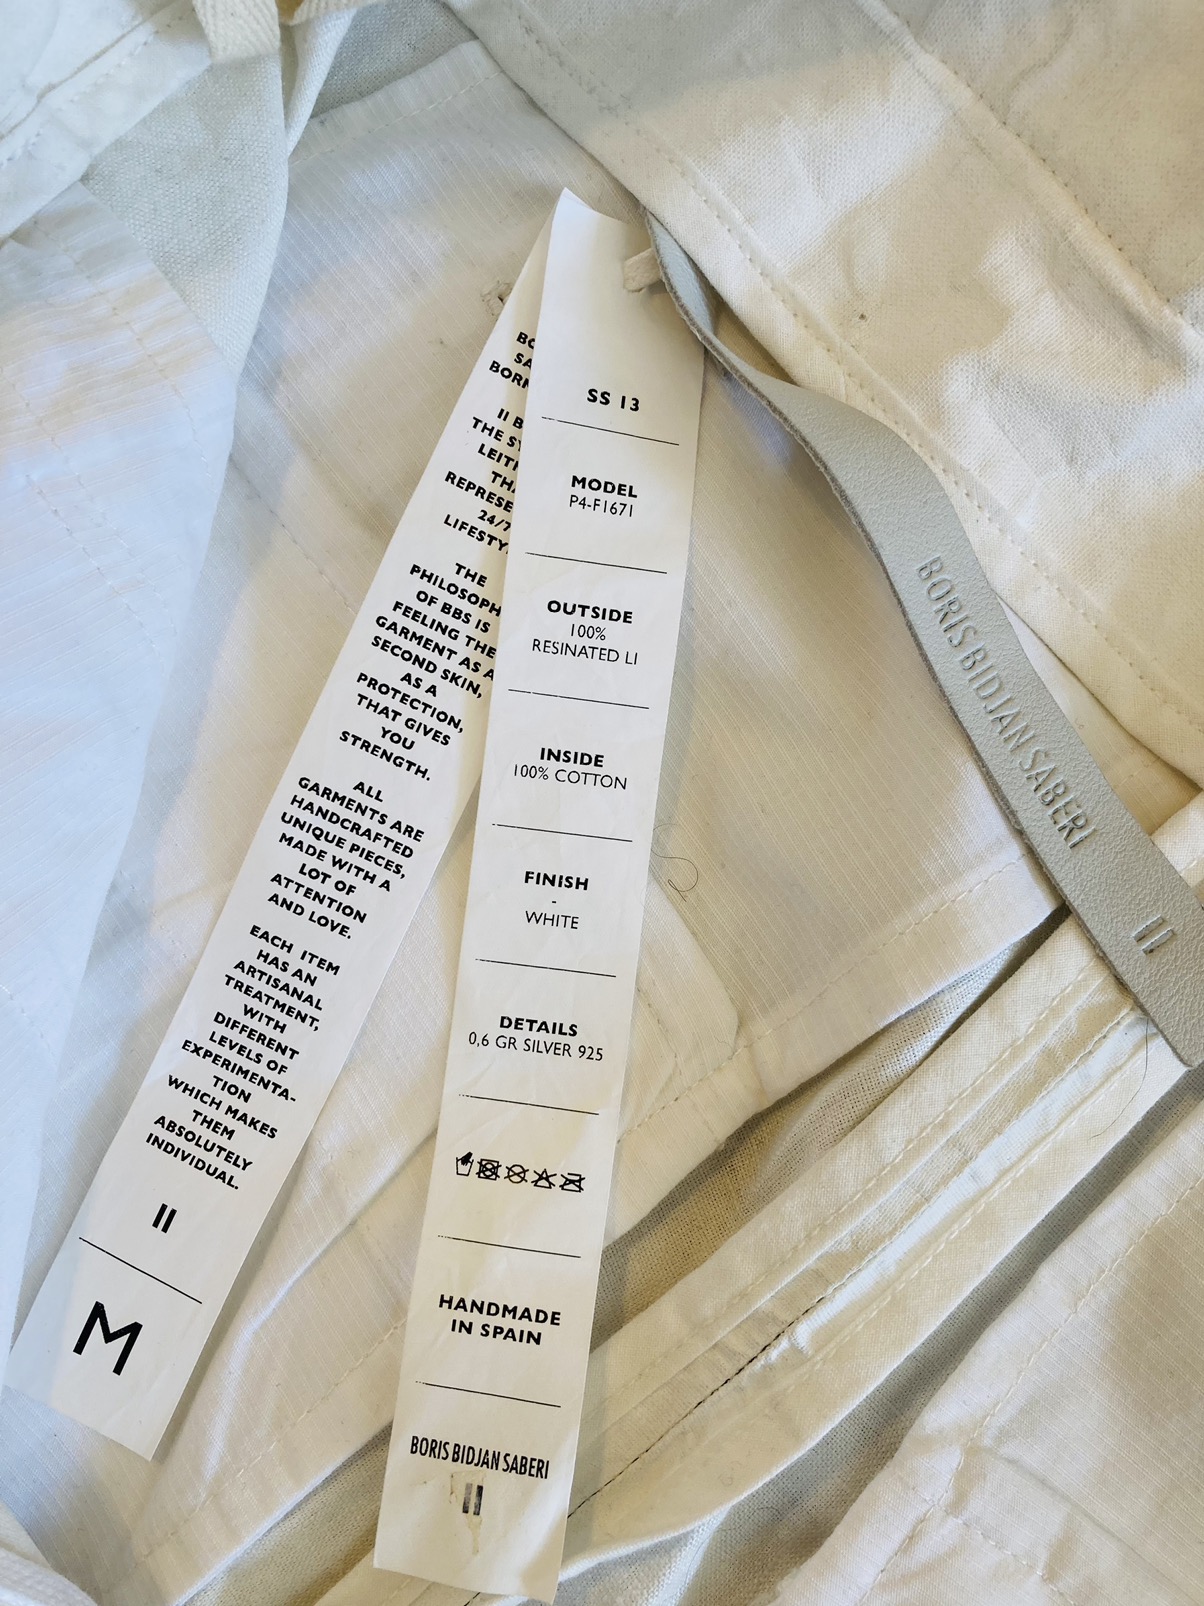 P4-F1671 Resinated Linen in White - 7